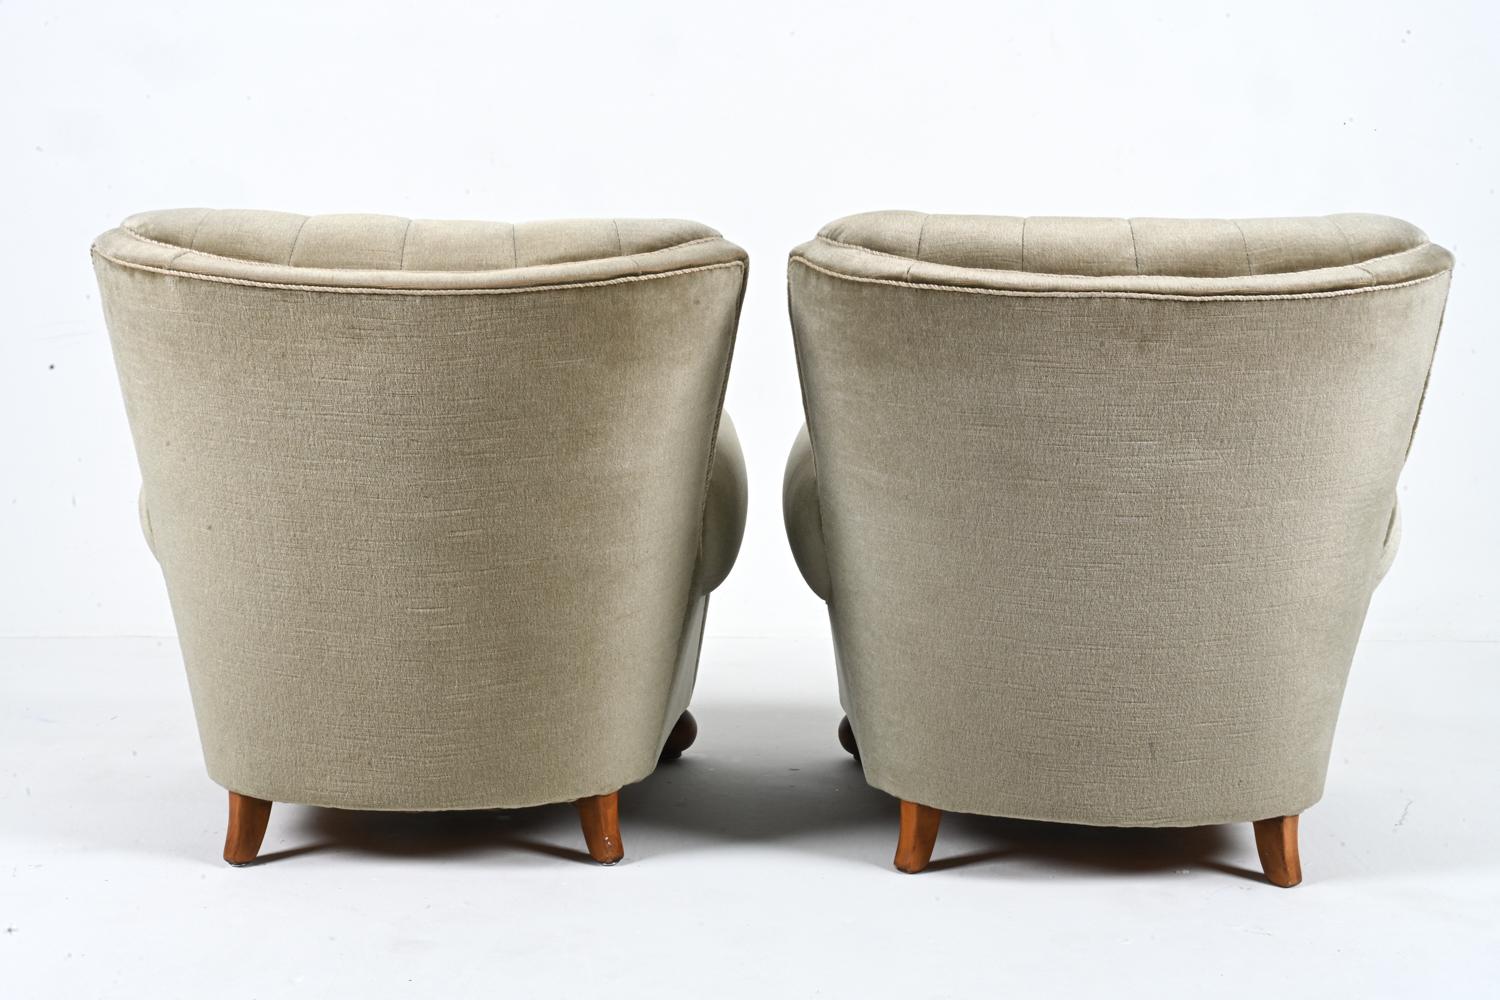 Pair of European Roll-Arm Club Chairs in Mohair and Beech, c. 1940's For Sale 10